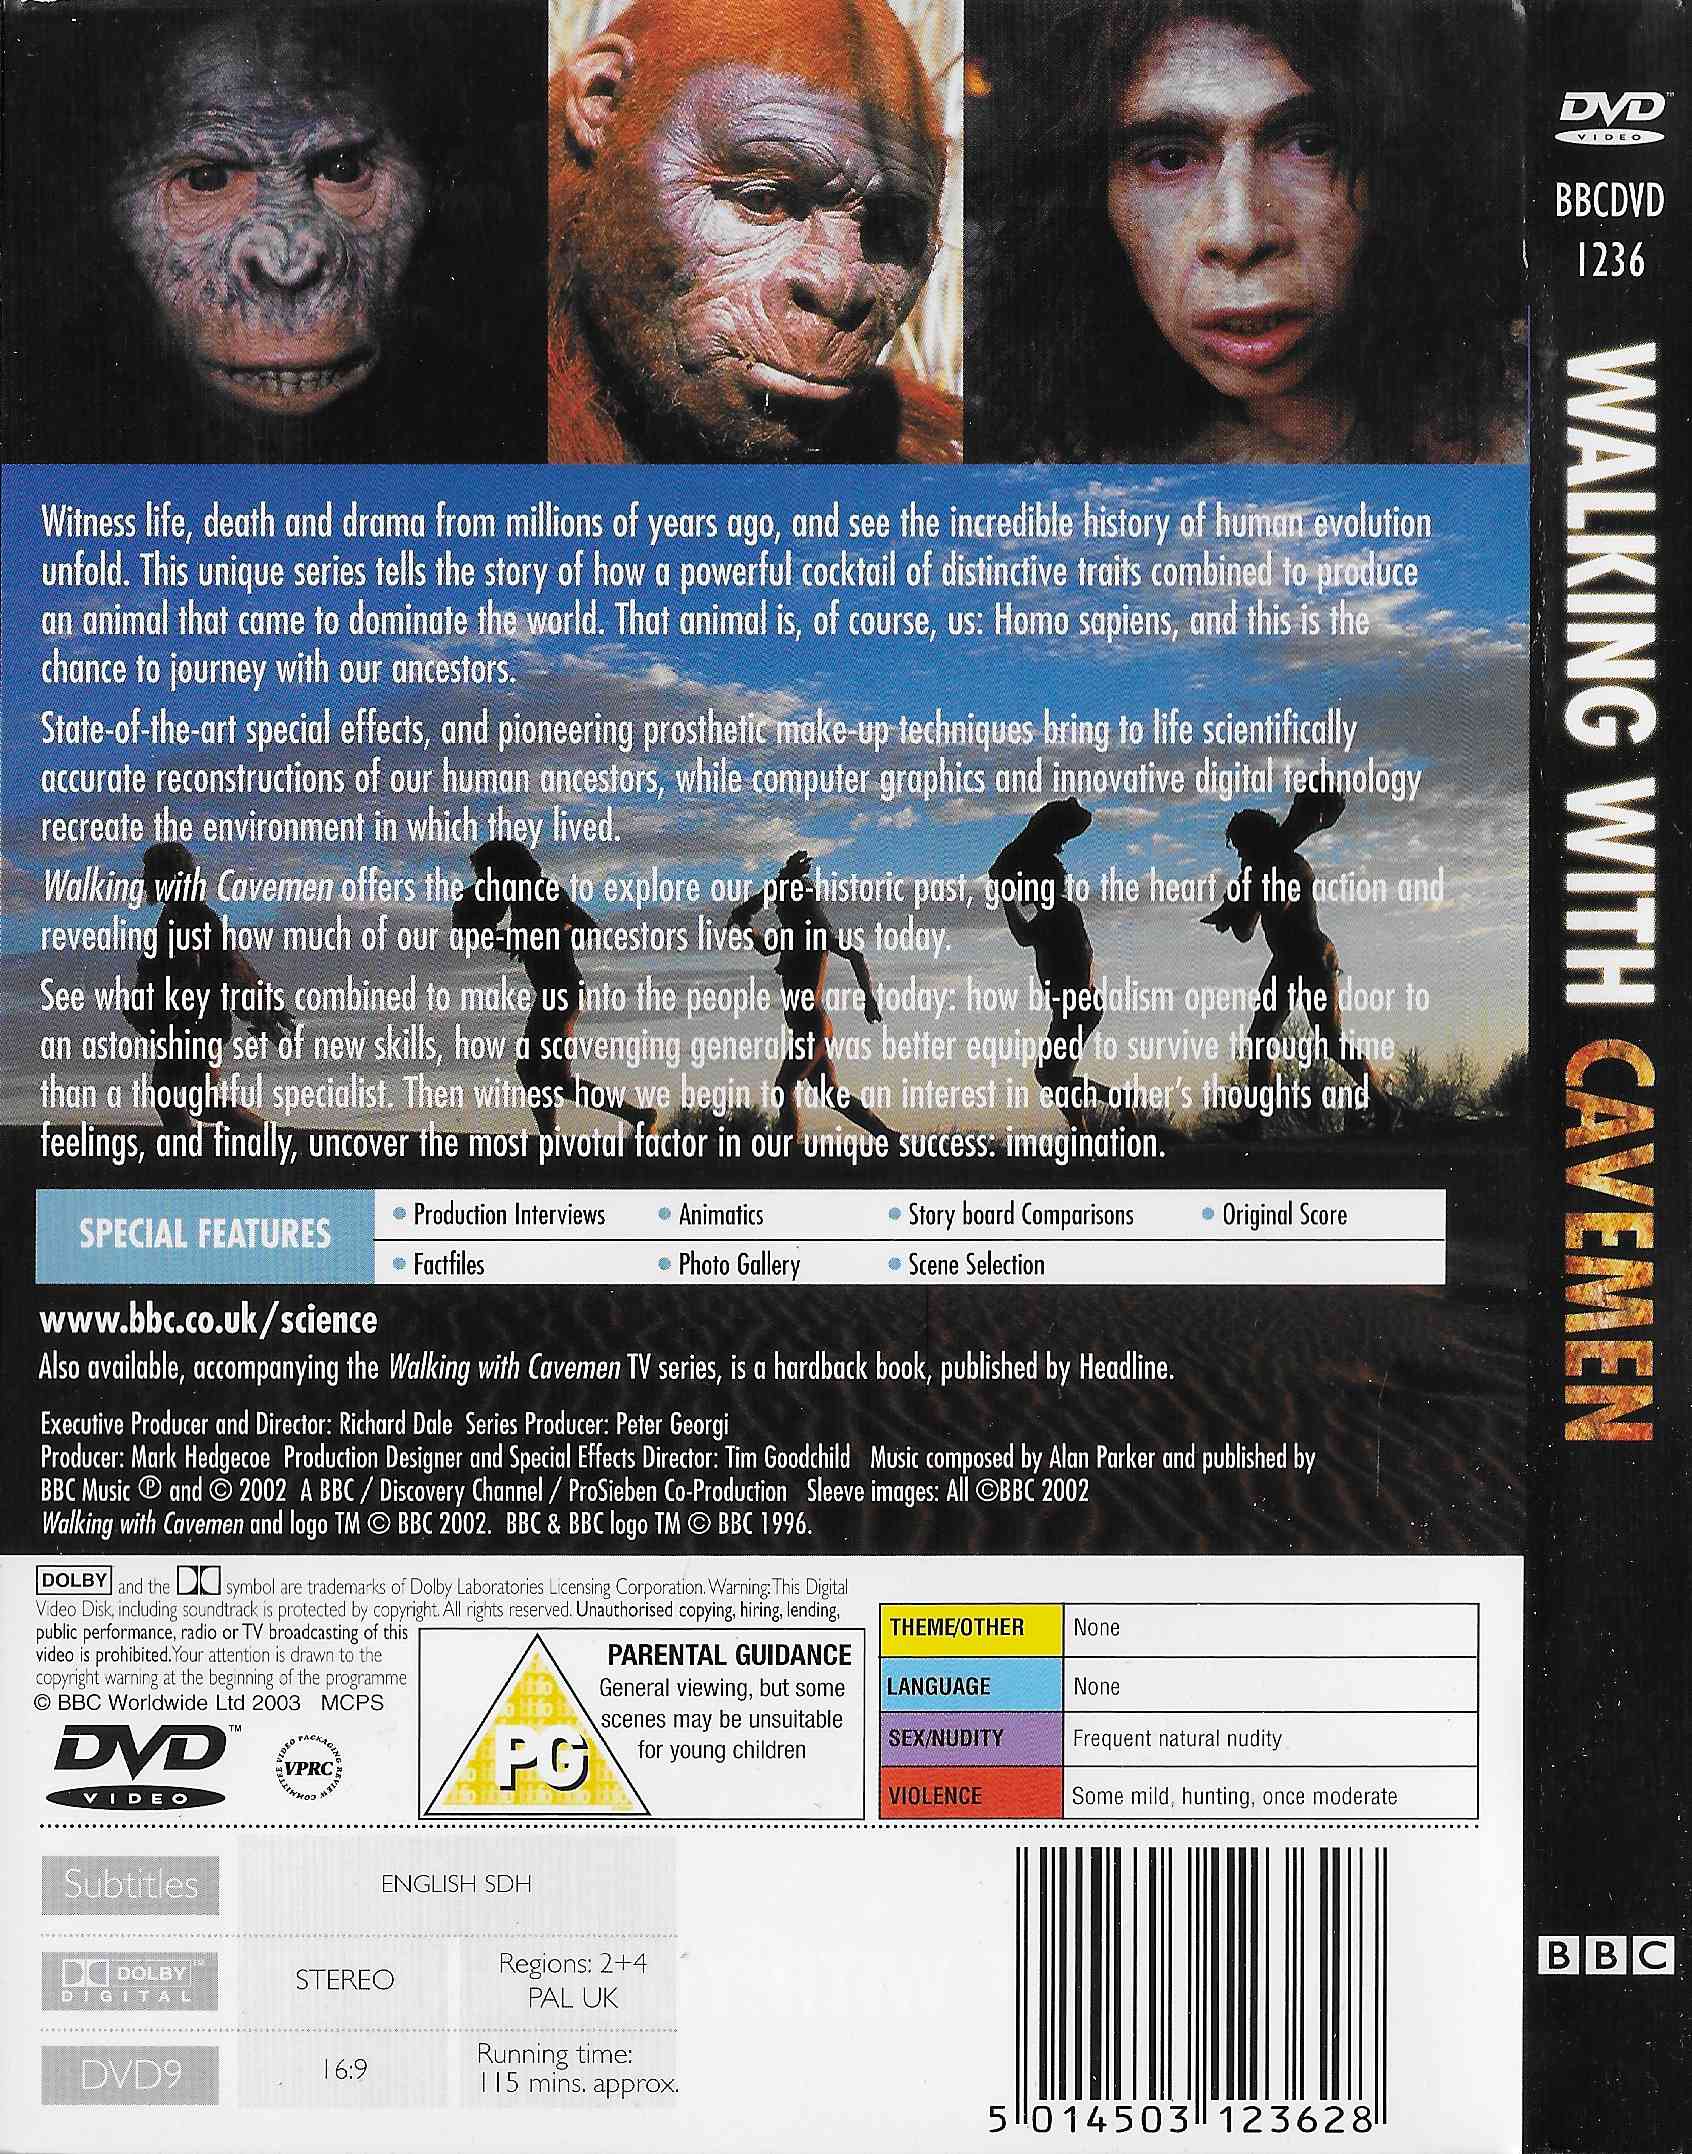 Picture of BBCDVD 1236 Walking with cavemen by artist Richard Dale from the BBC records and Tapes library